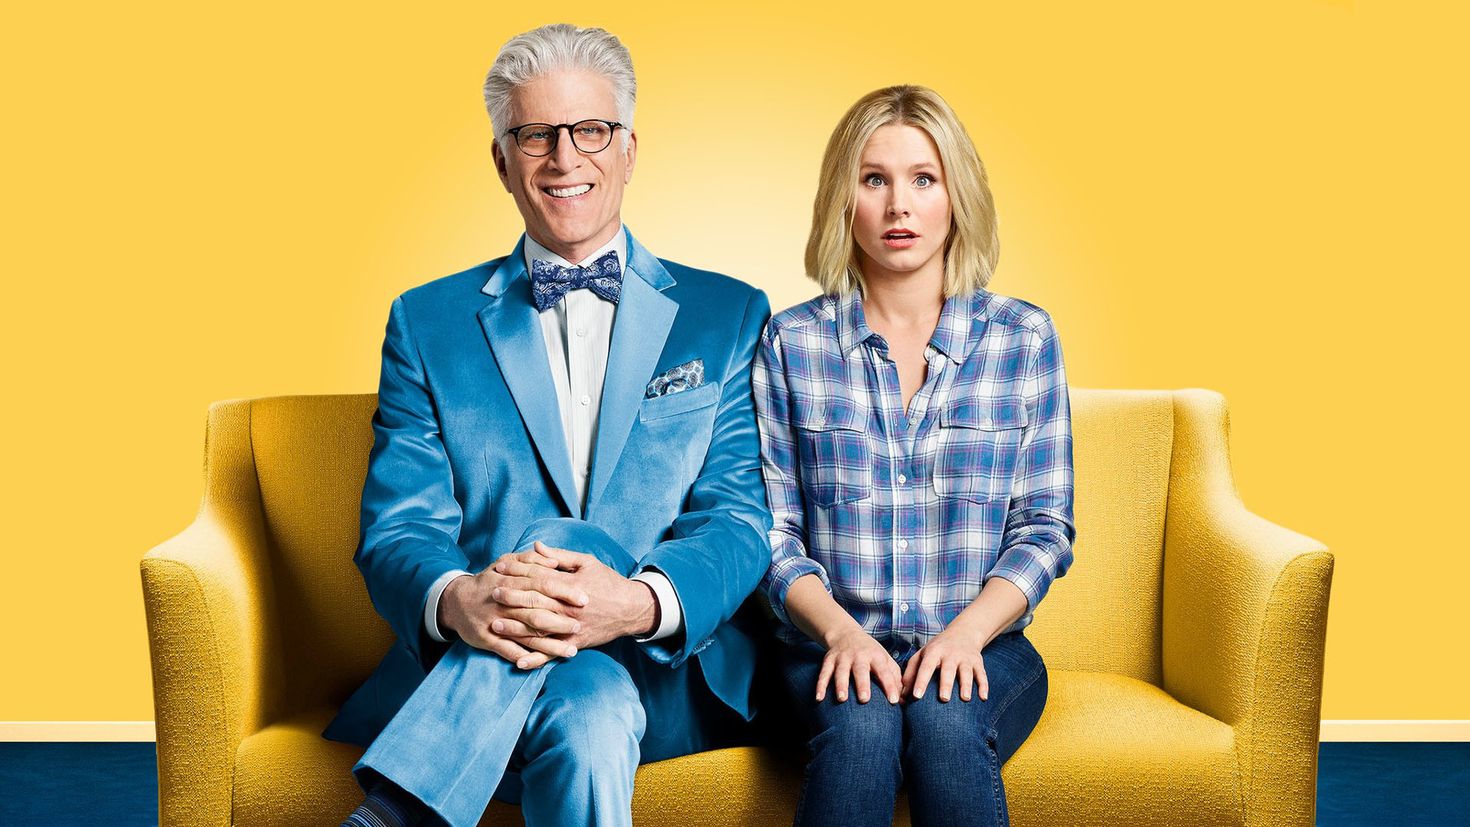 The best in the world take. Кристен Белл the good place. Кристен Белл в лучшем мире. В лучшем мире.